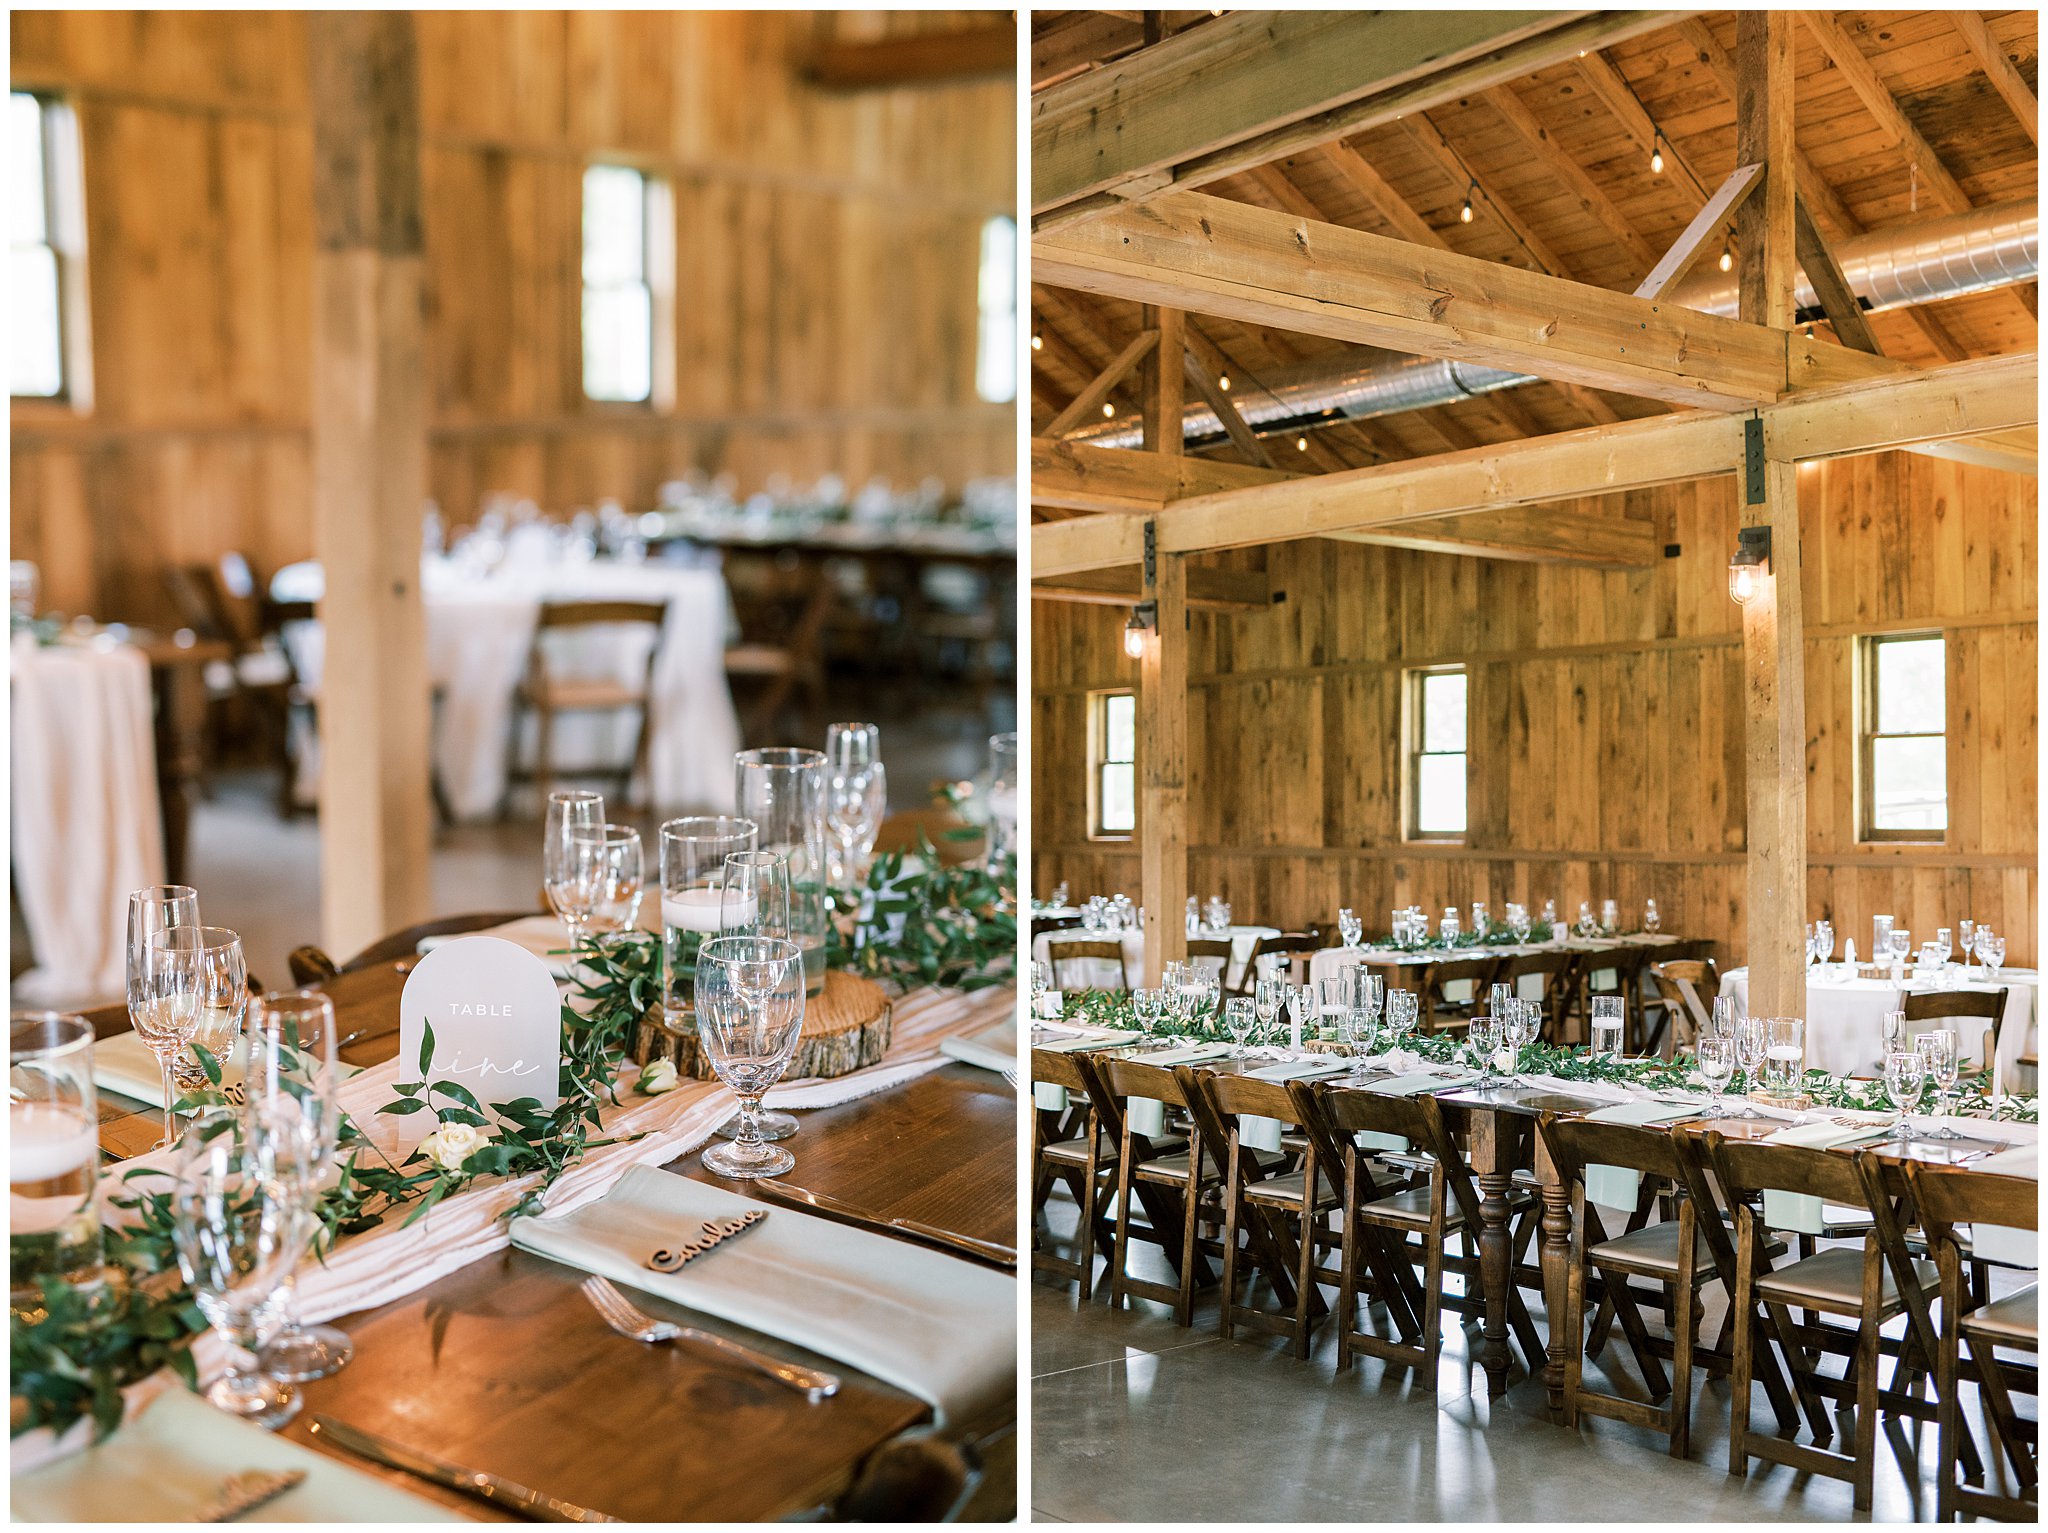 tablescapes and centerpieces from Cedarmont Farm Wedding in Franklin, TN